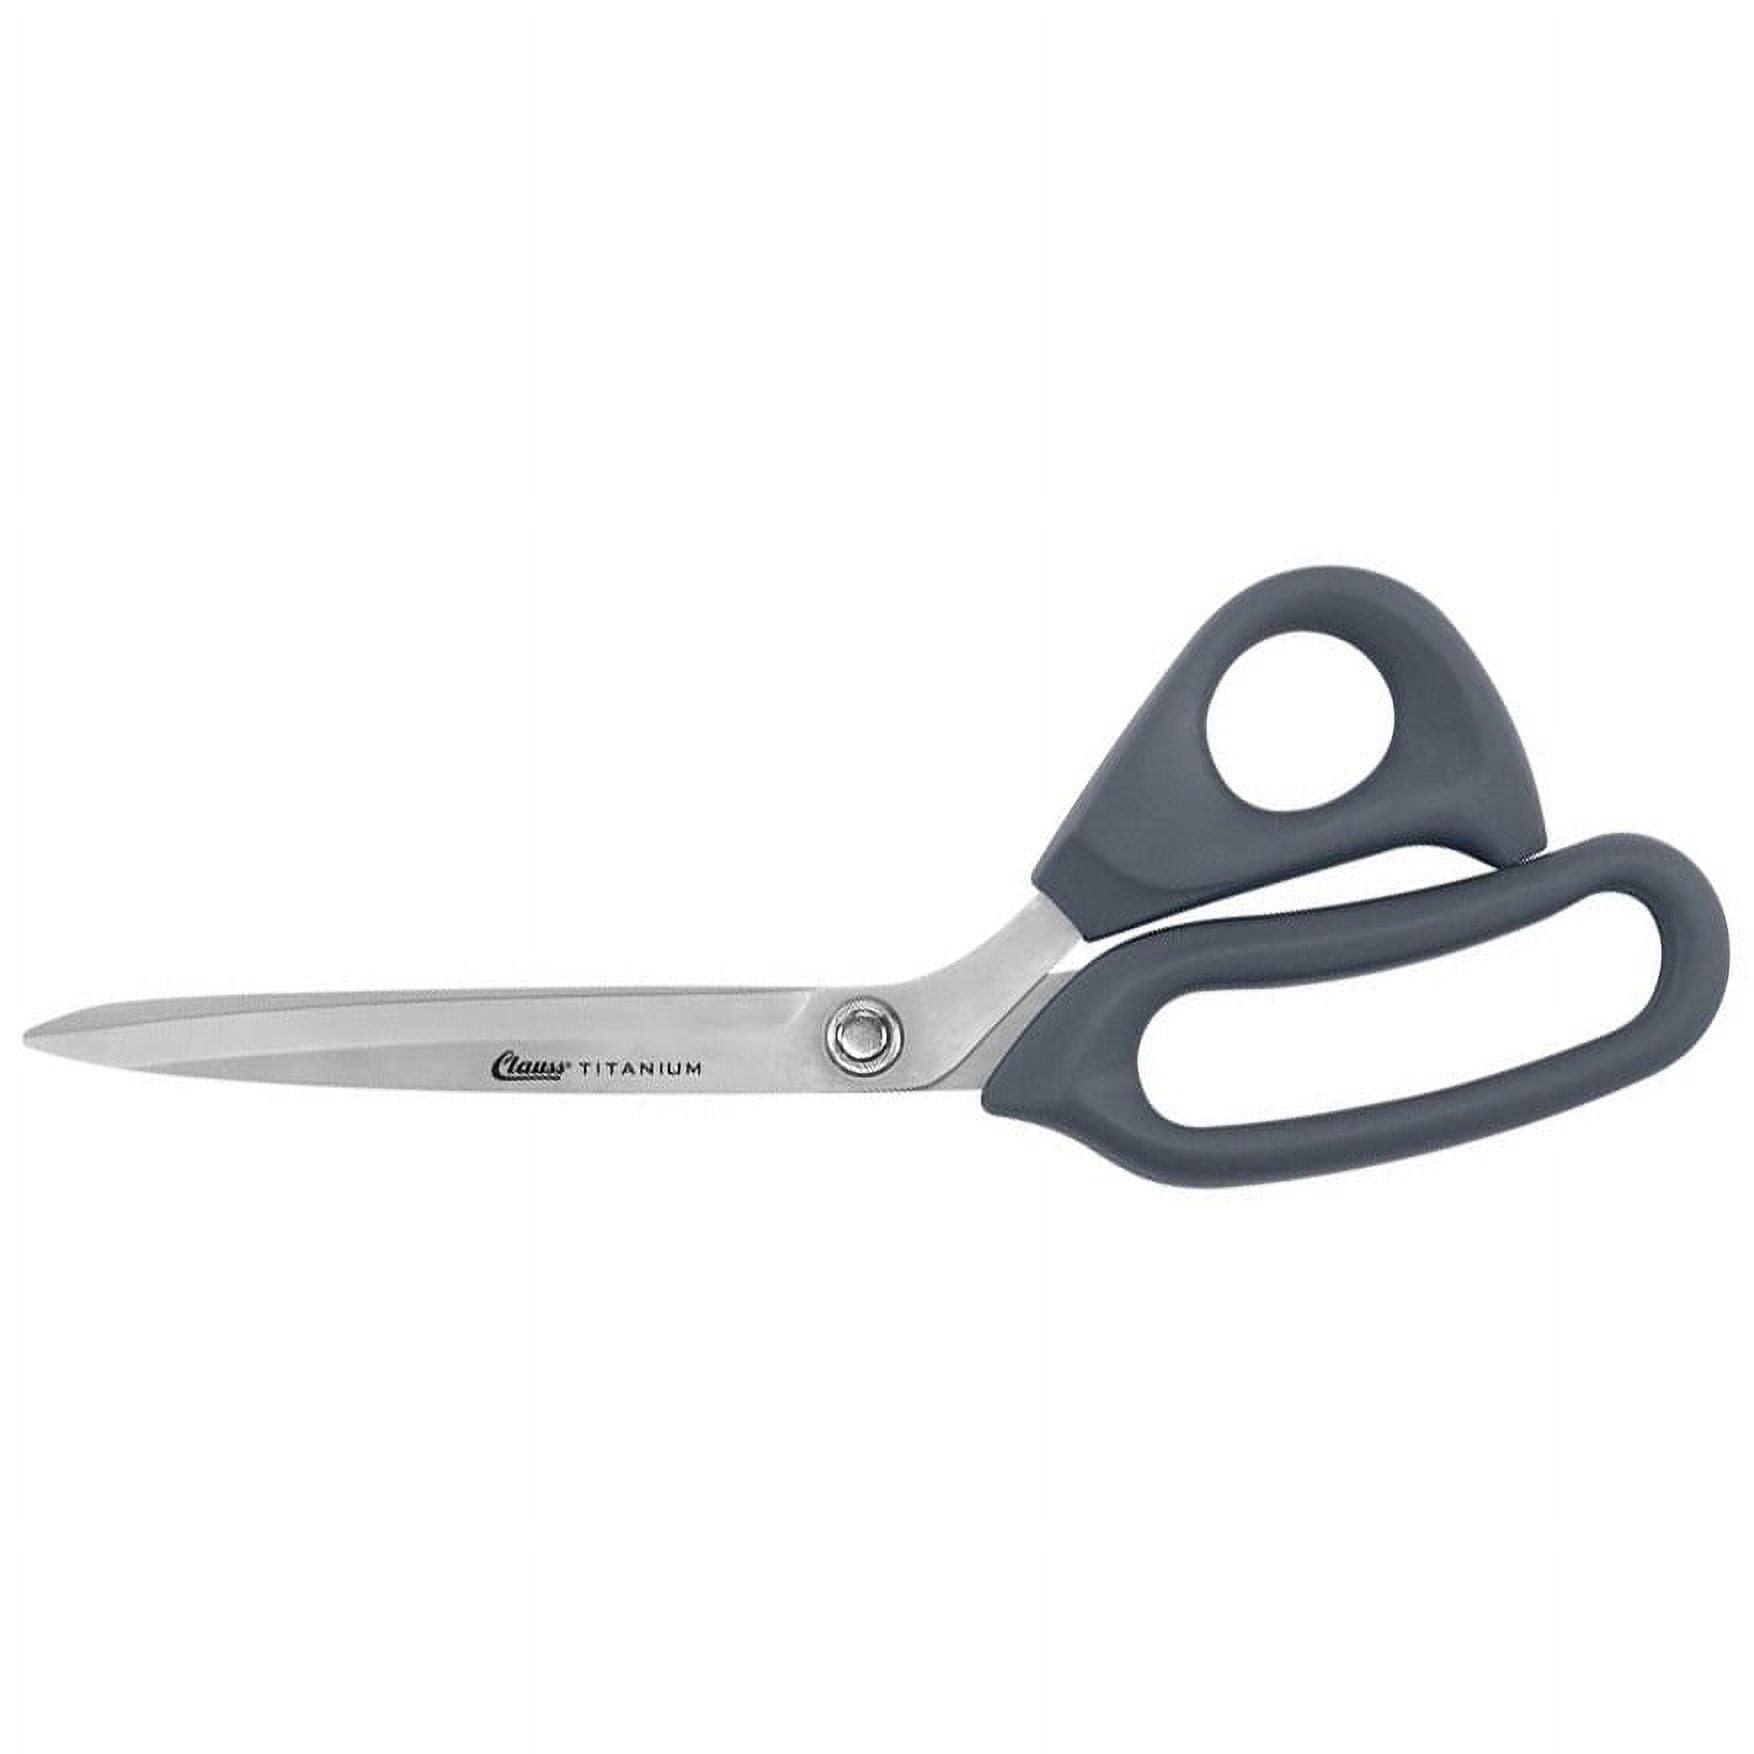  Premium Kitchen Shears by Better Kitchen Products, 8.5